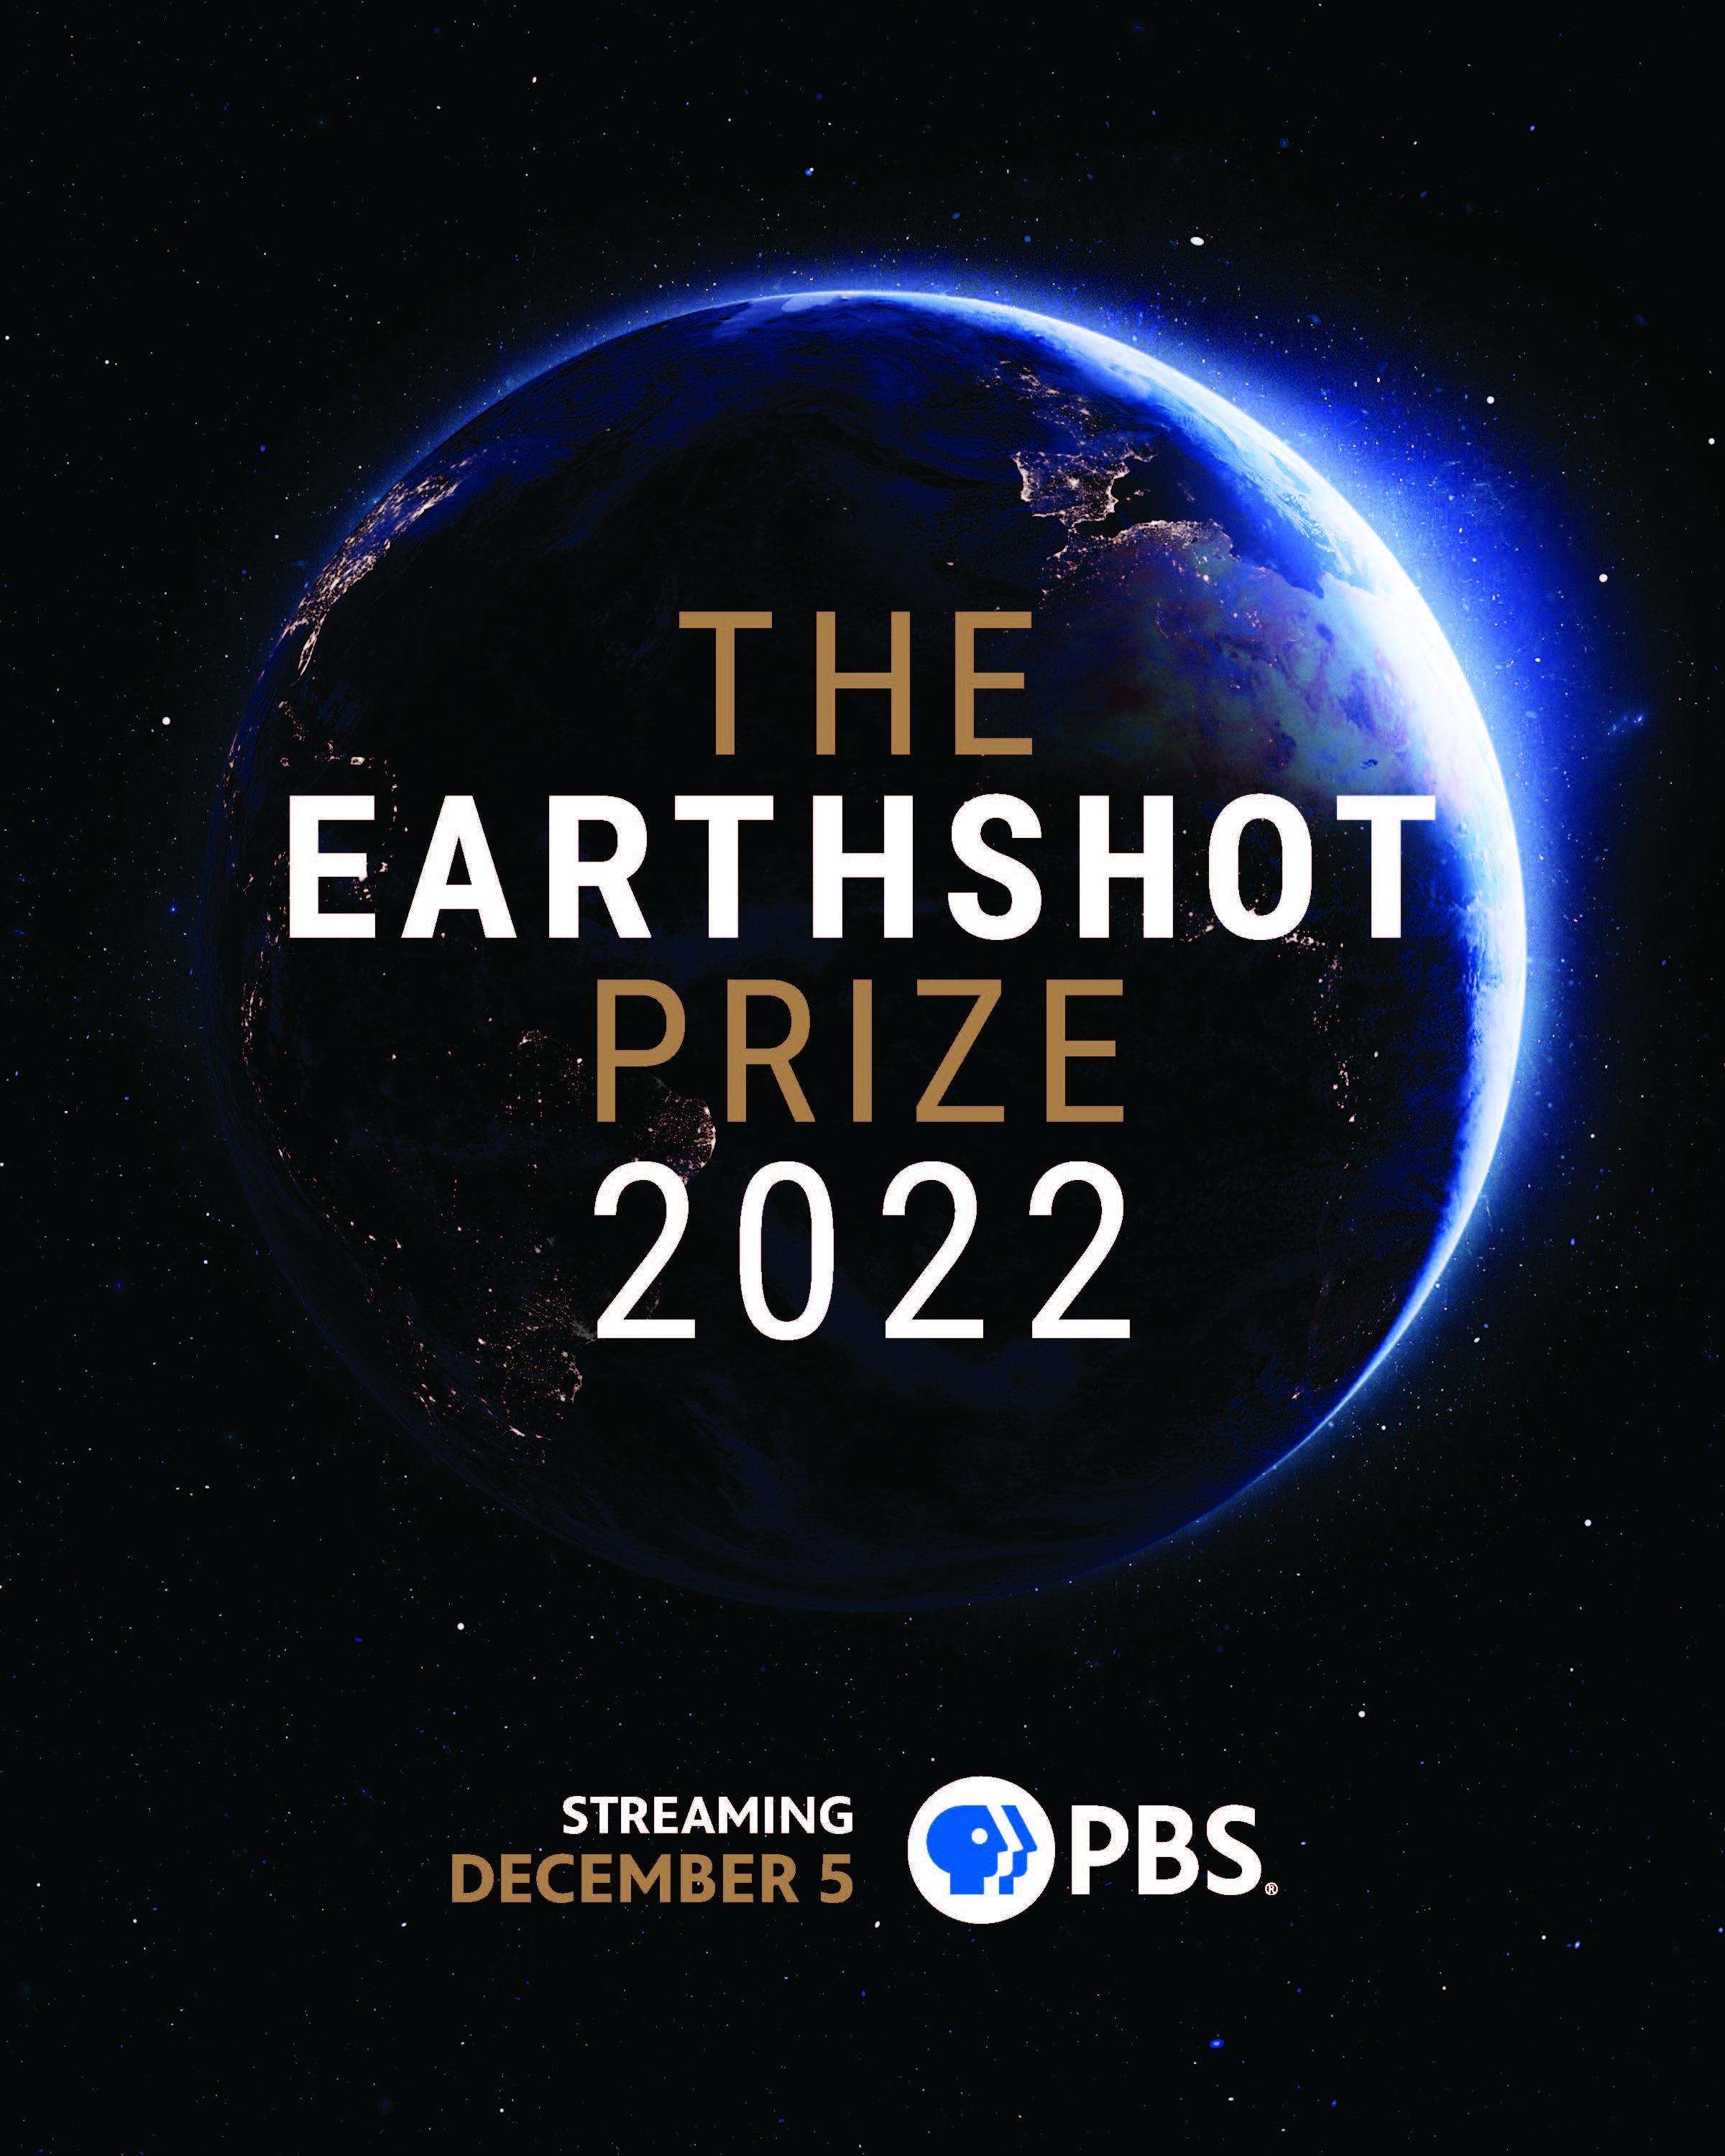 The Earthshot Prize 2022 over an image of the Earth from space